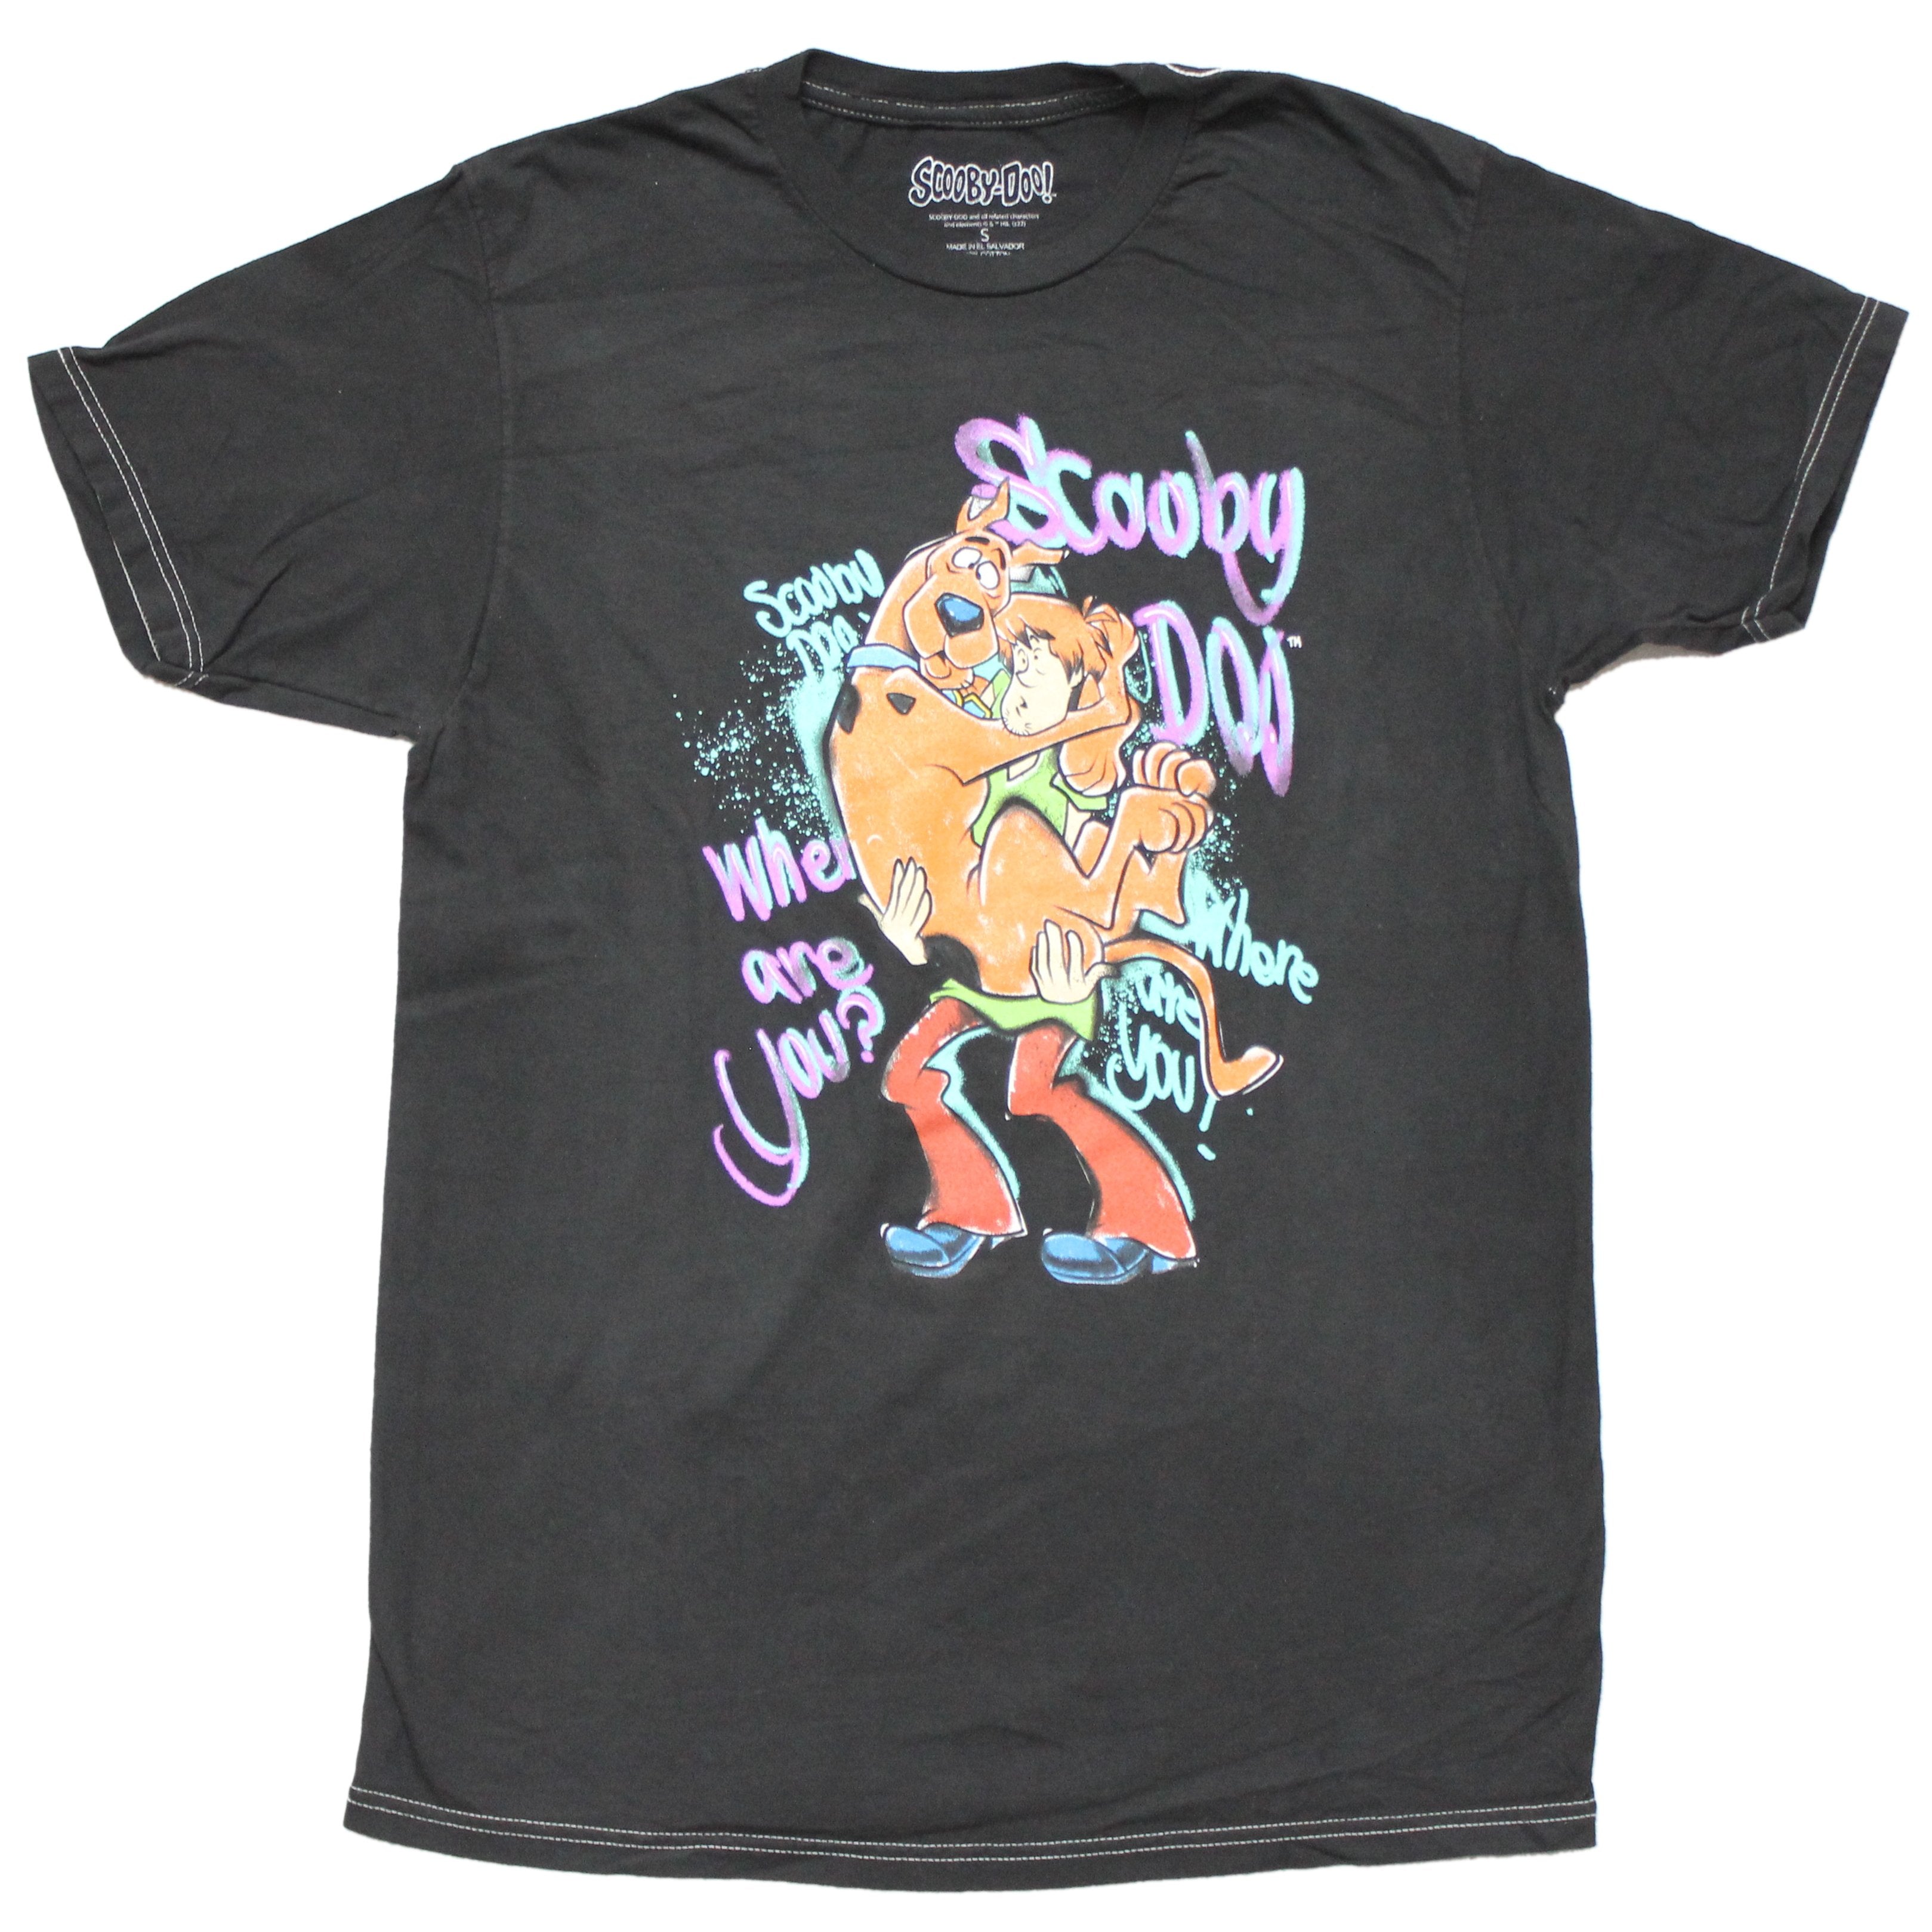 Scooby Doo Mens T-shirt - Where Are You Shaggy Holding Scooby